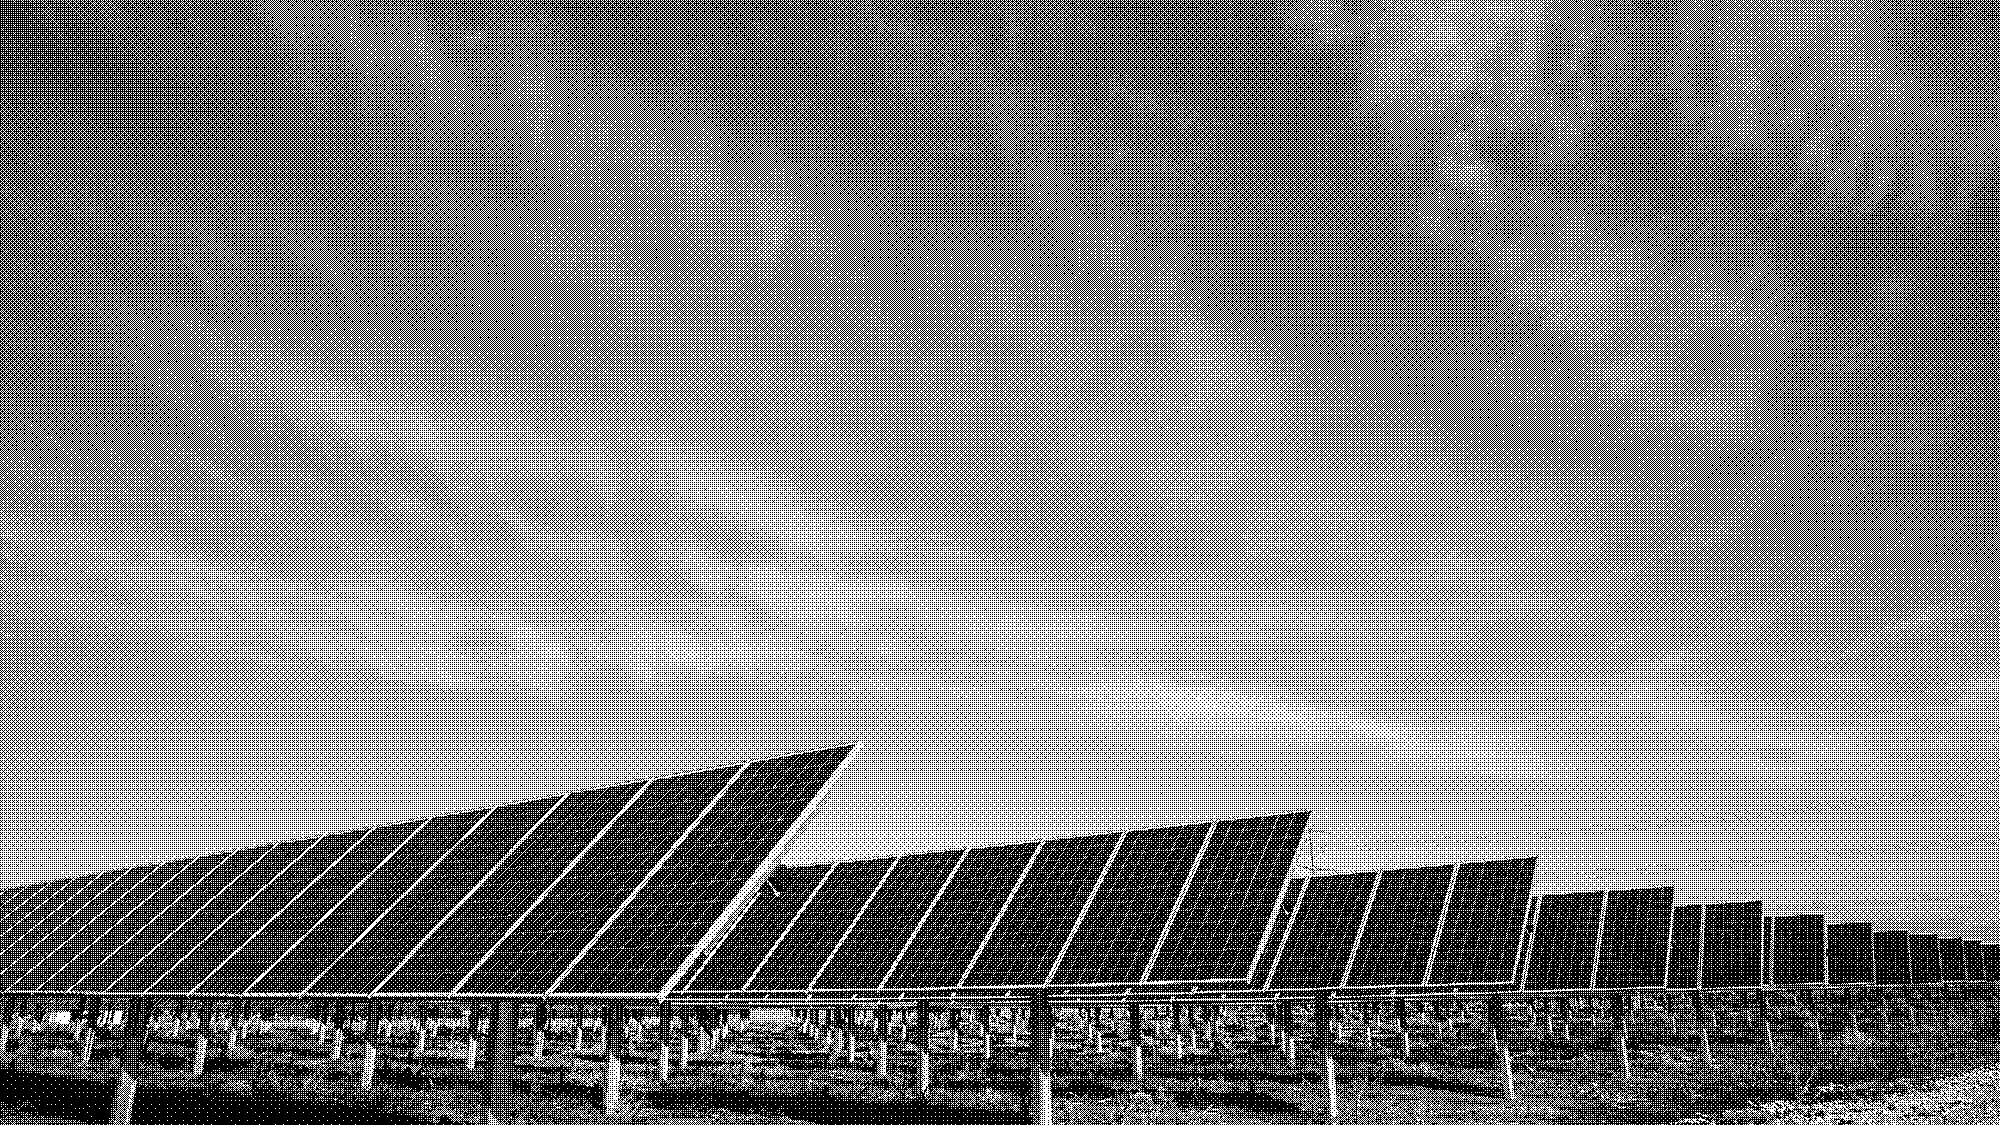 either a solar farm, wind farm, rainforest, or smokestack billowing smoke into the air rendered in lo-fi, pixelly grayscal. The image moves as you scroll in the style of documetary filmmaker Ken Burns.